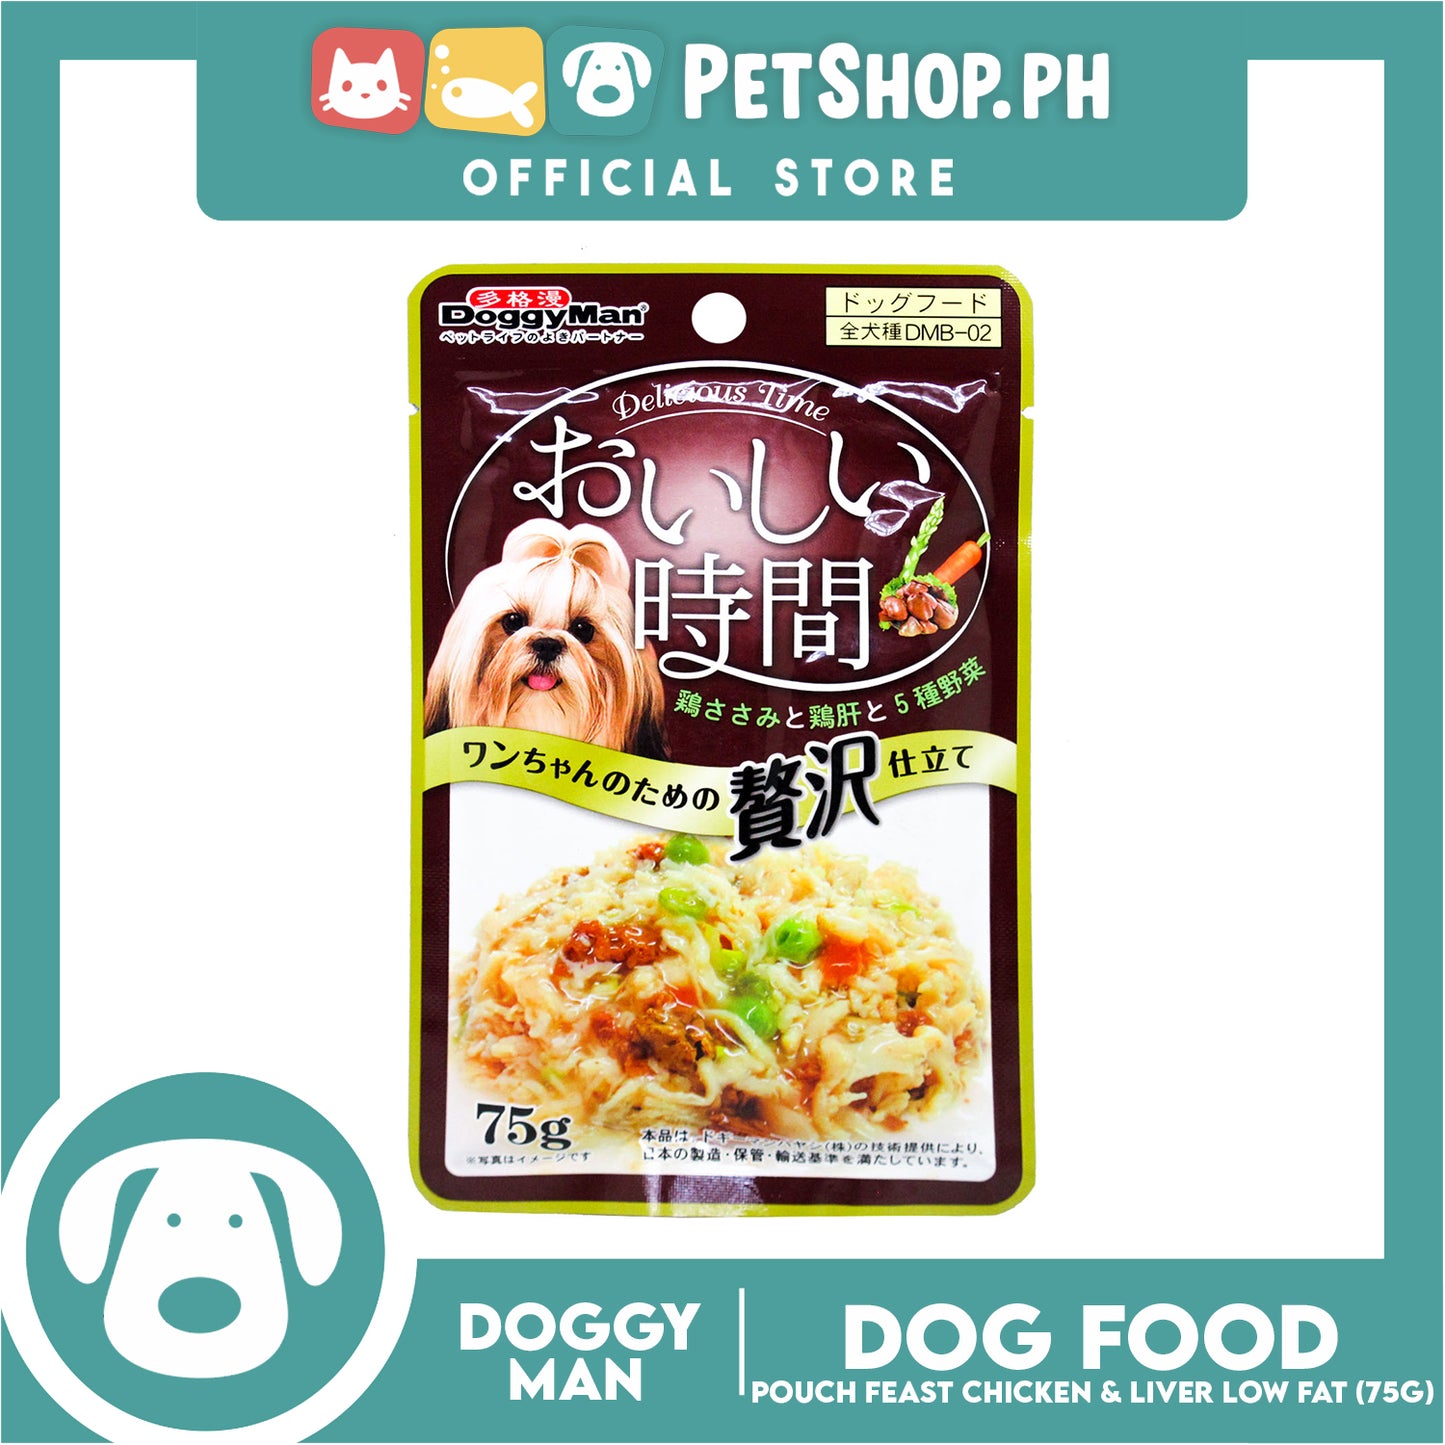 Doggyman Delicious Time Pouch Feast Dog Food 75g (Chicken And Liver Low Fat) Z0065 Dog Pouch Food, Dog Wet Food